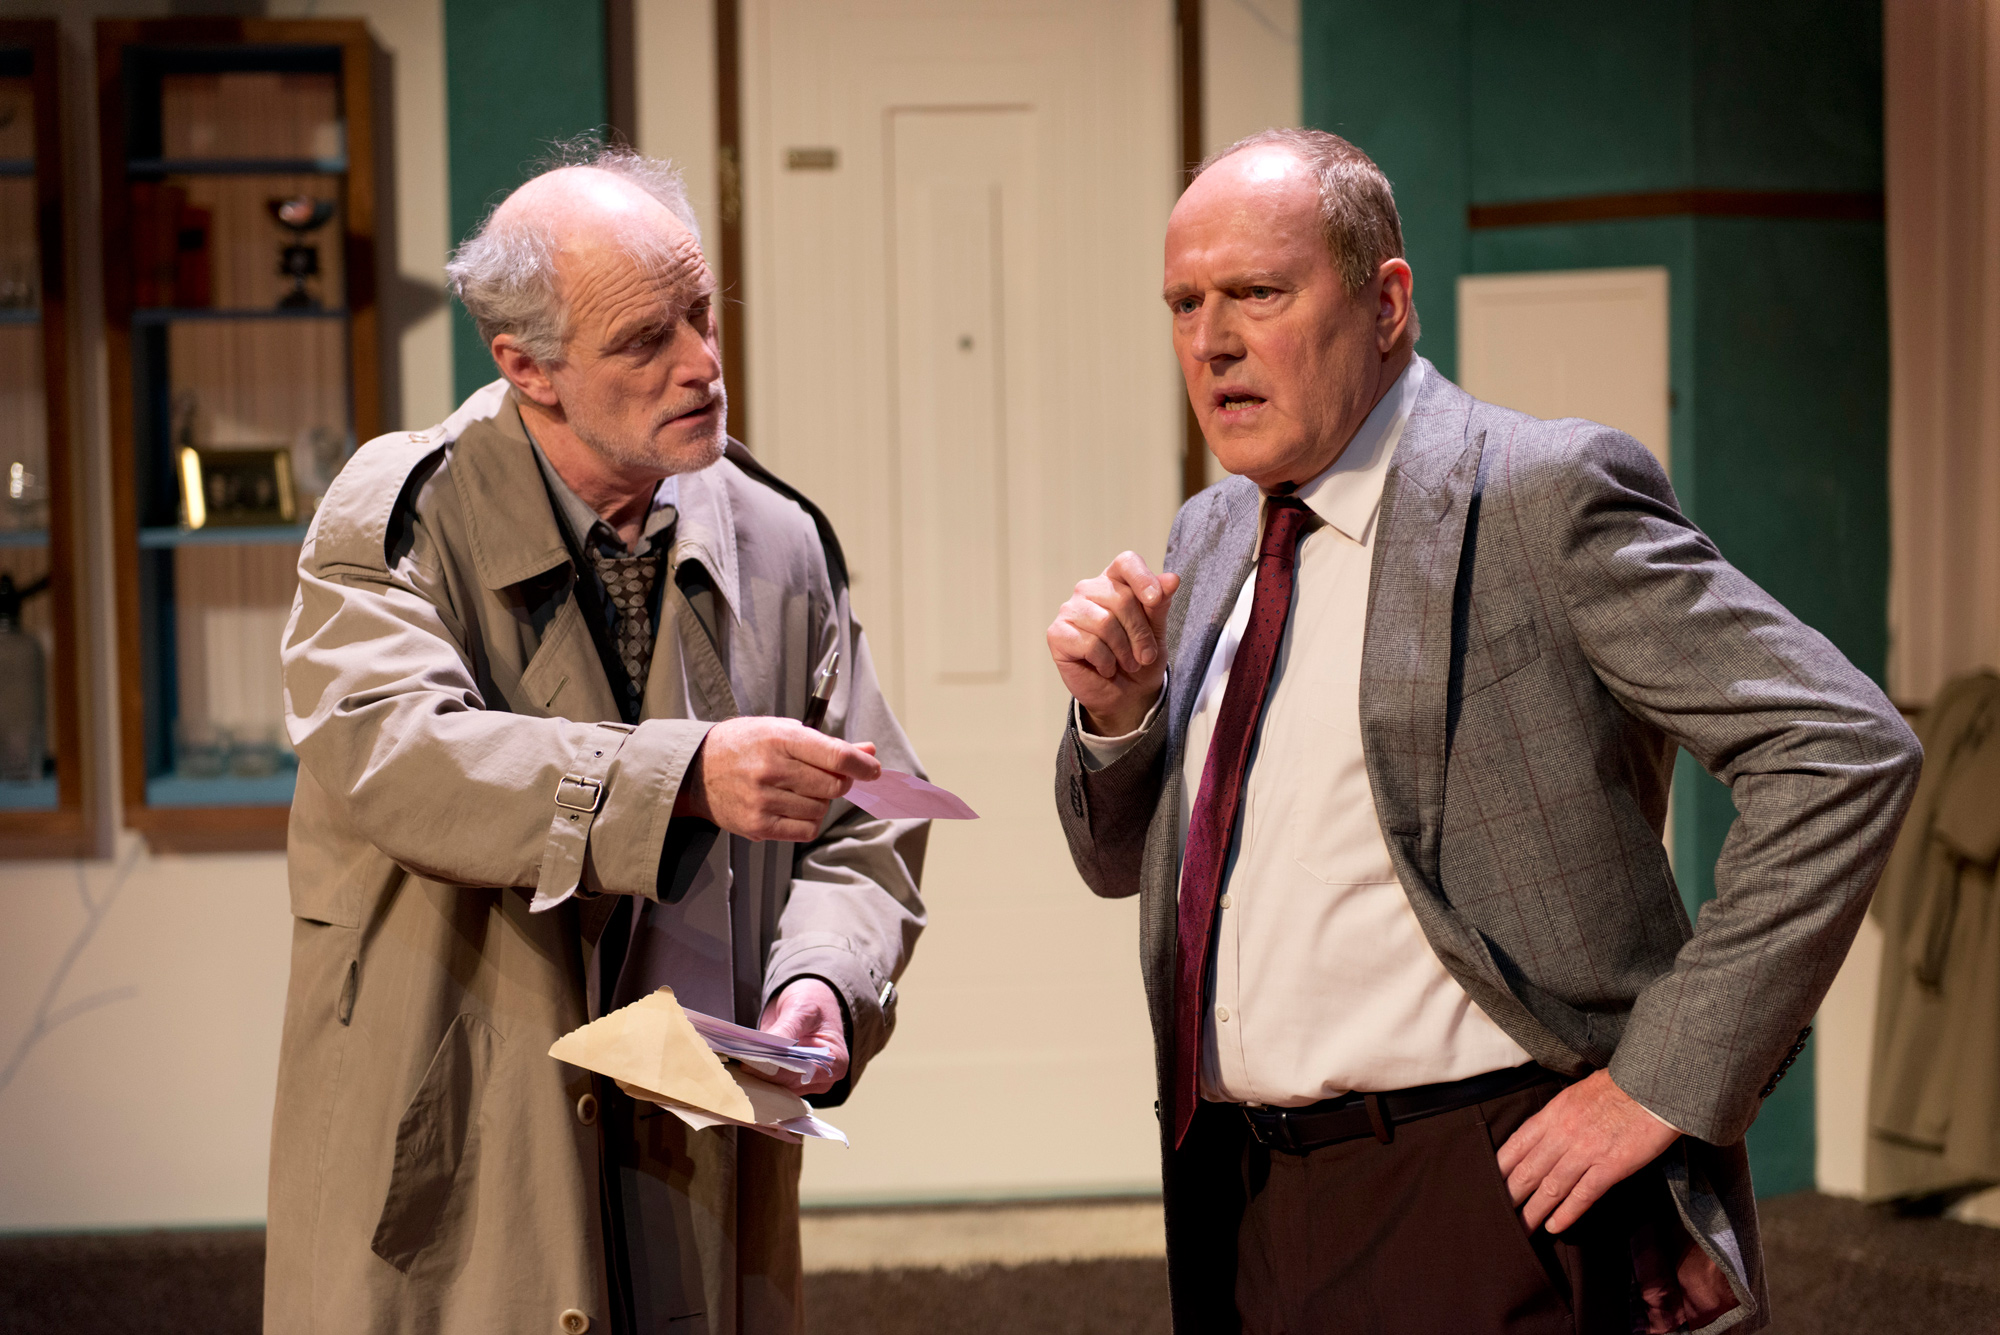 As inspector Hubbard in Dial M for Murder. With Peter Tuinman as Tony Wendice. Hitchcock series adaptation by Thrillertheater.